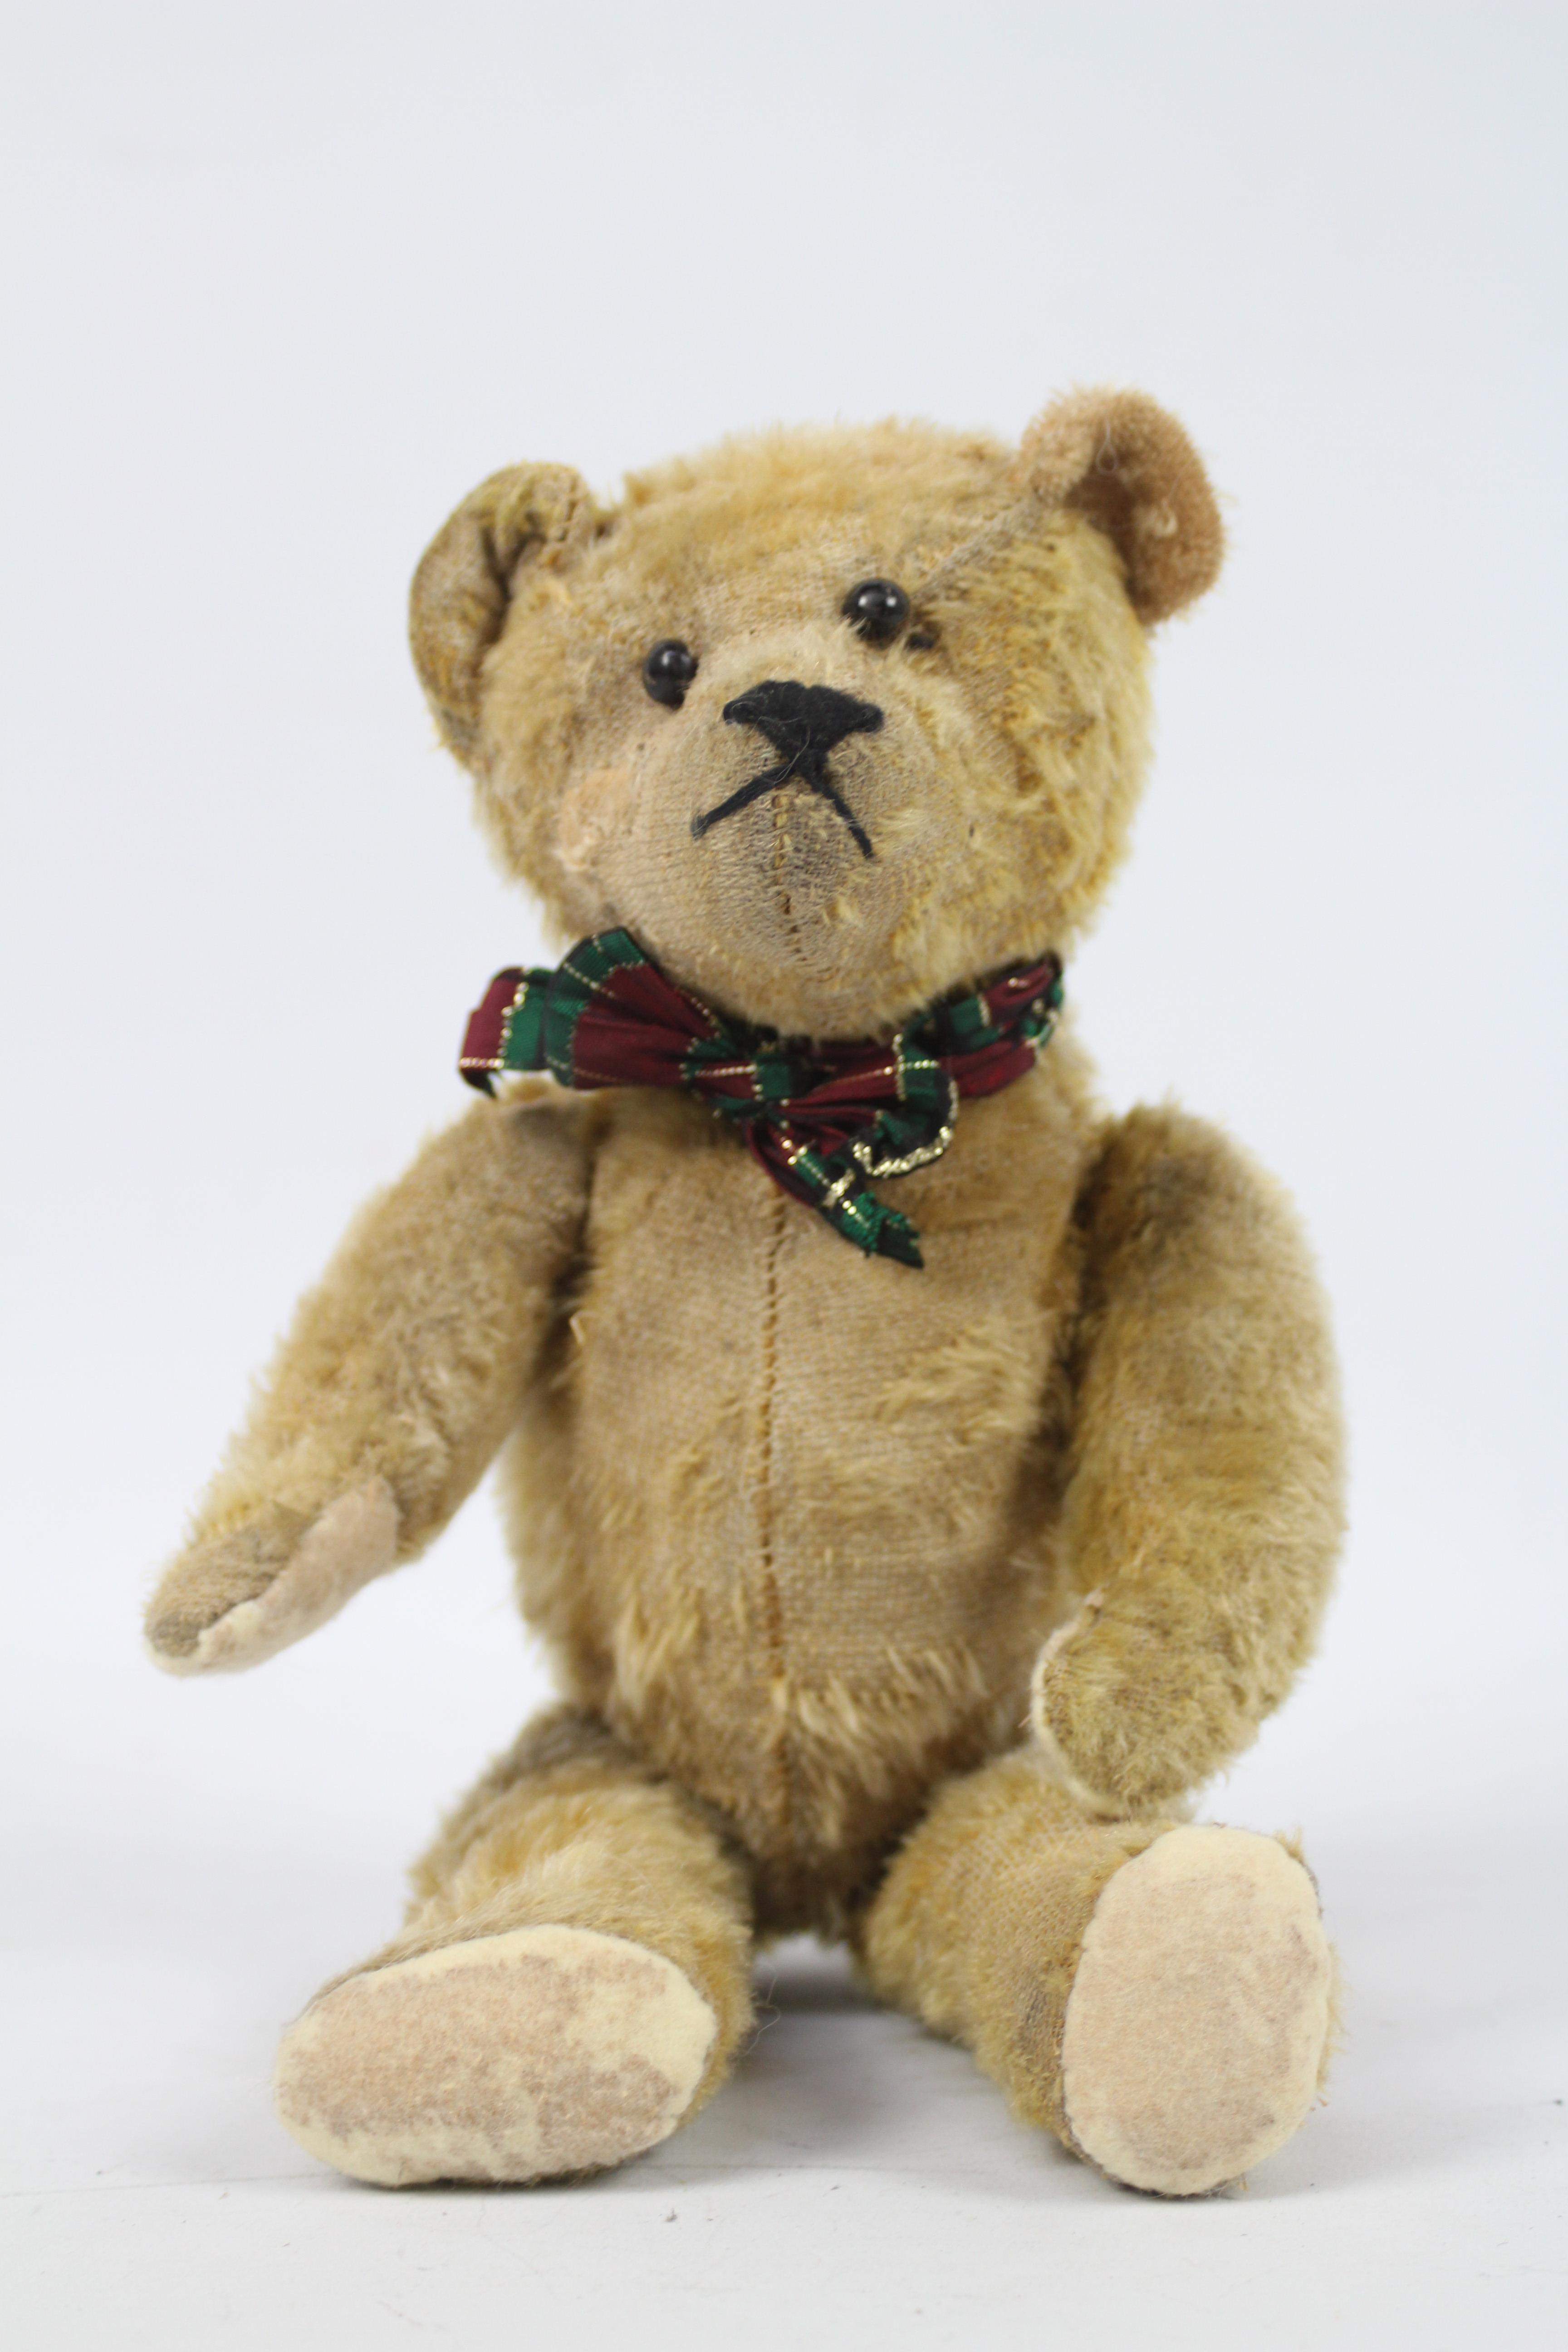 A sawdust filled mohair teddy bear - measuring approx 33 cms in length, having jointed limbs,